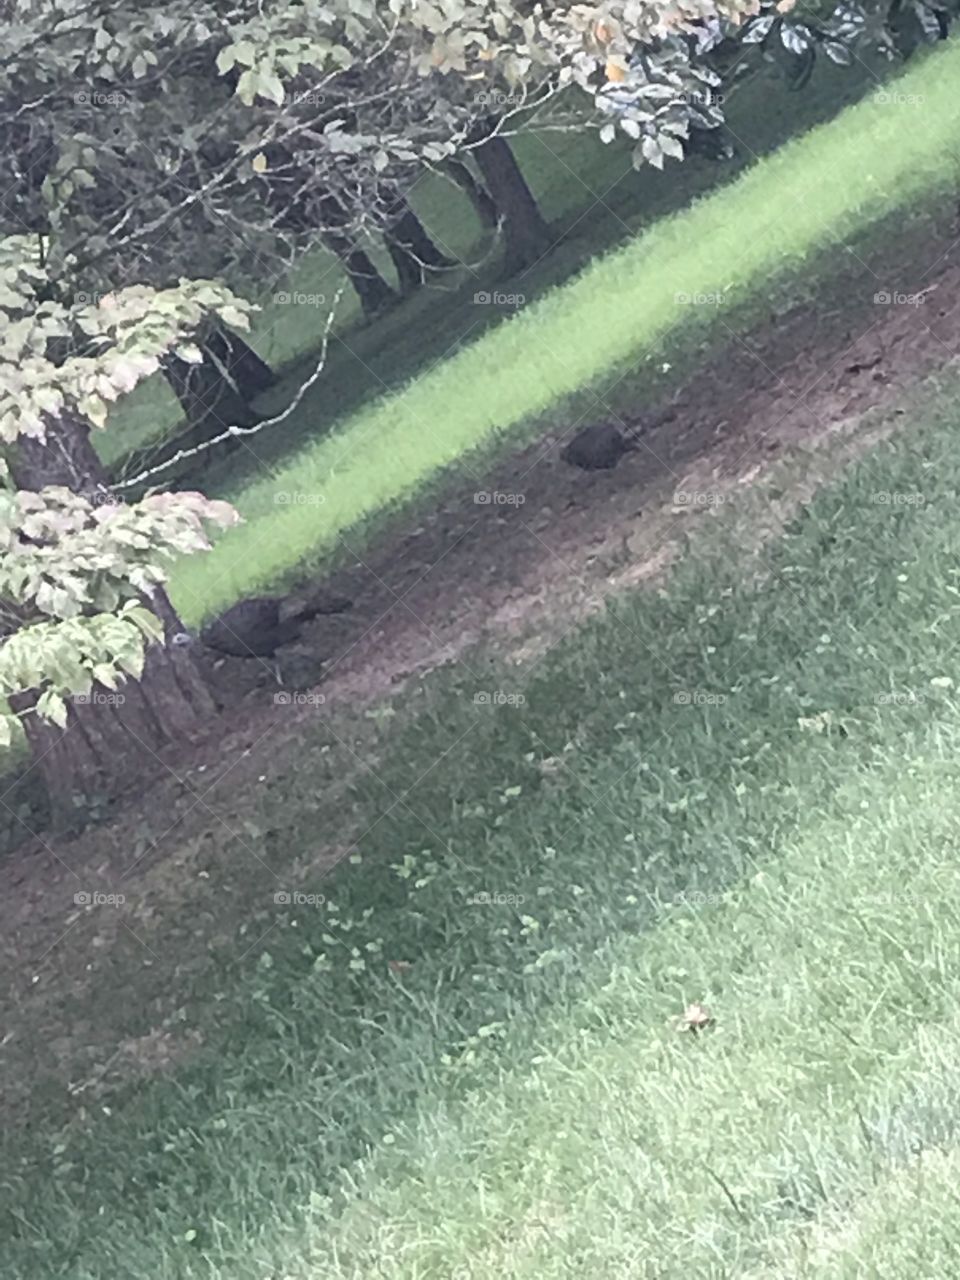 Pleasant photo of two turkeys taking shelter under a tree on a hot summer day.